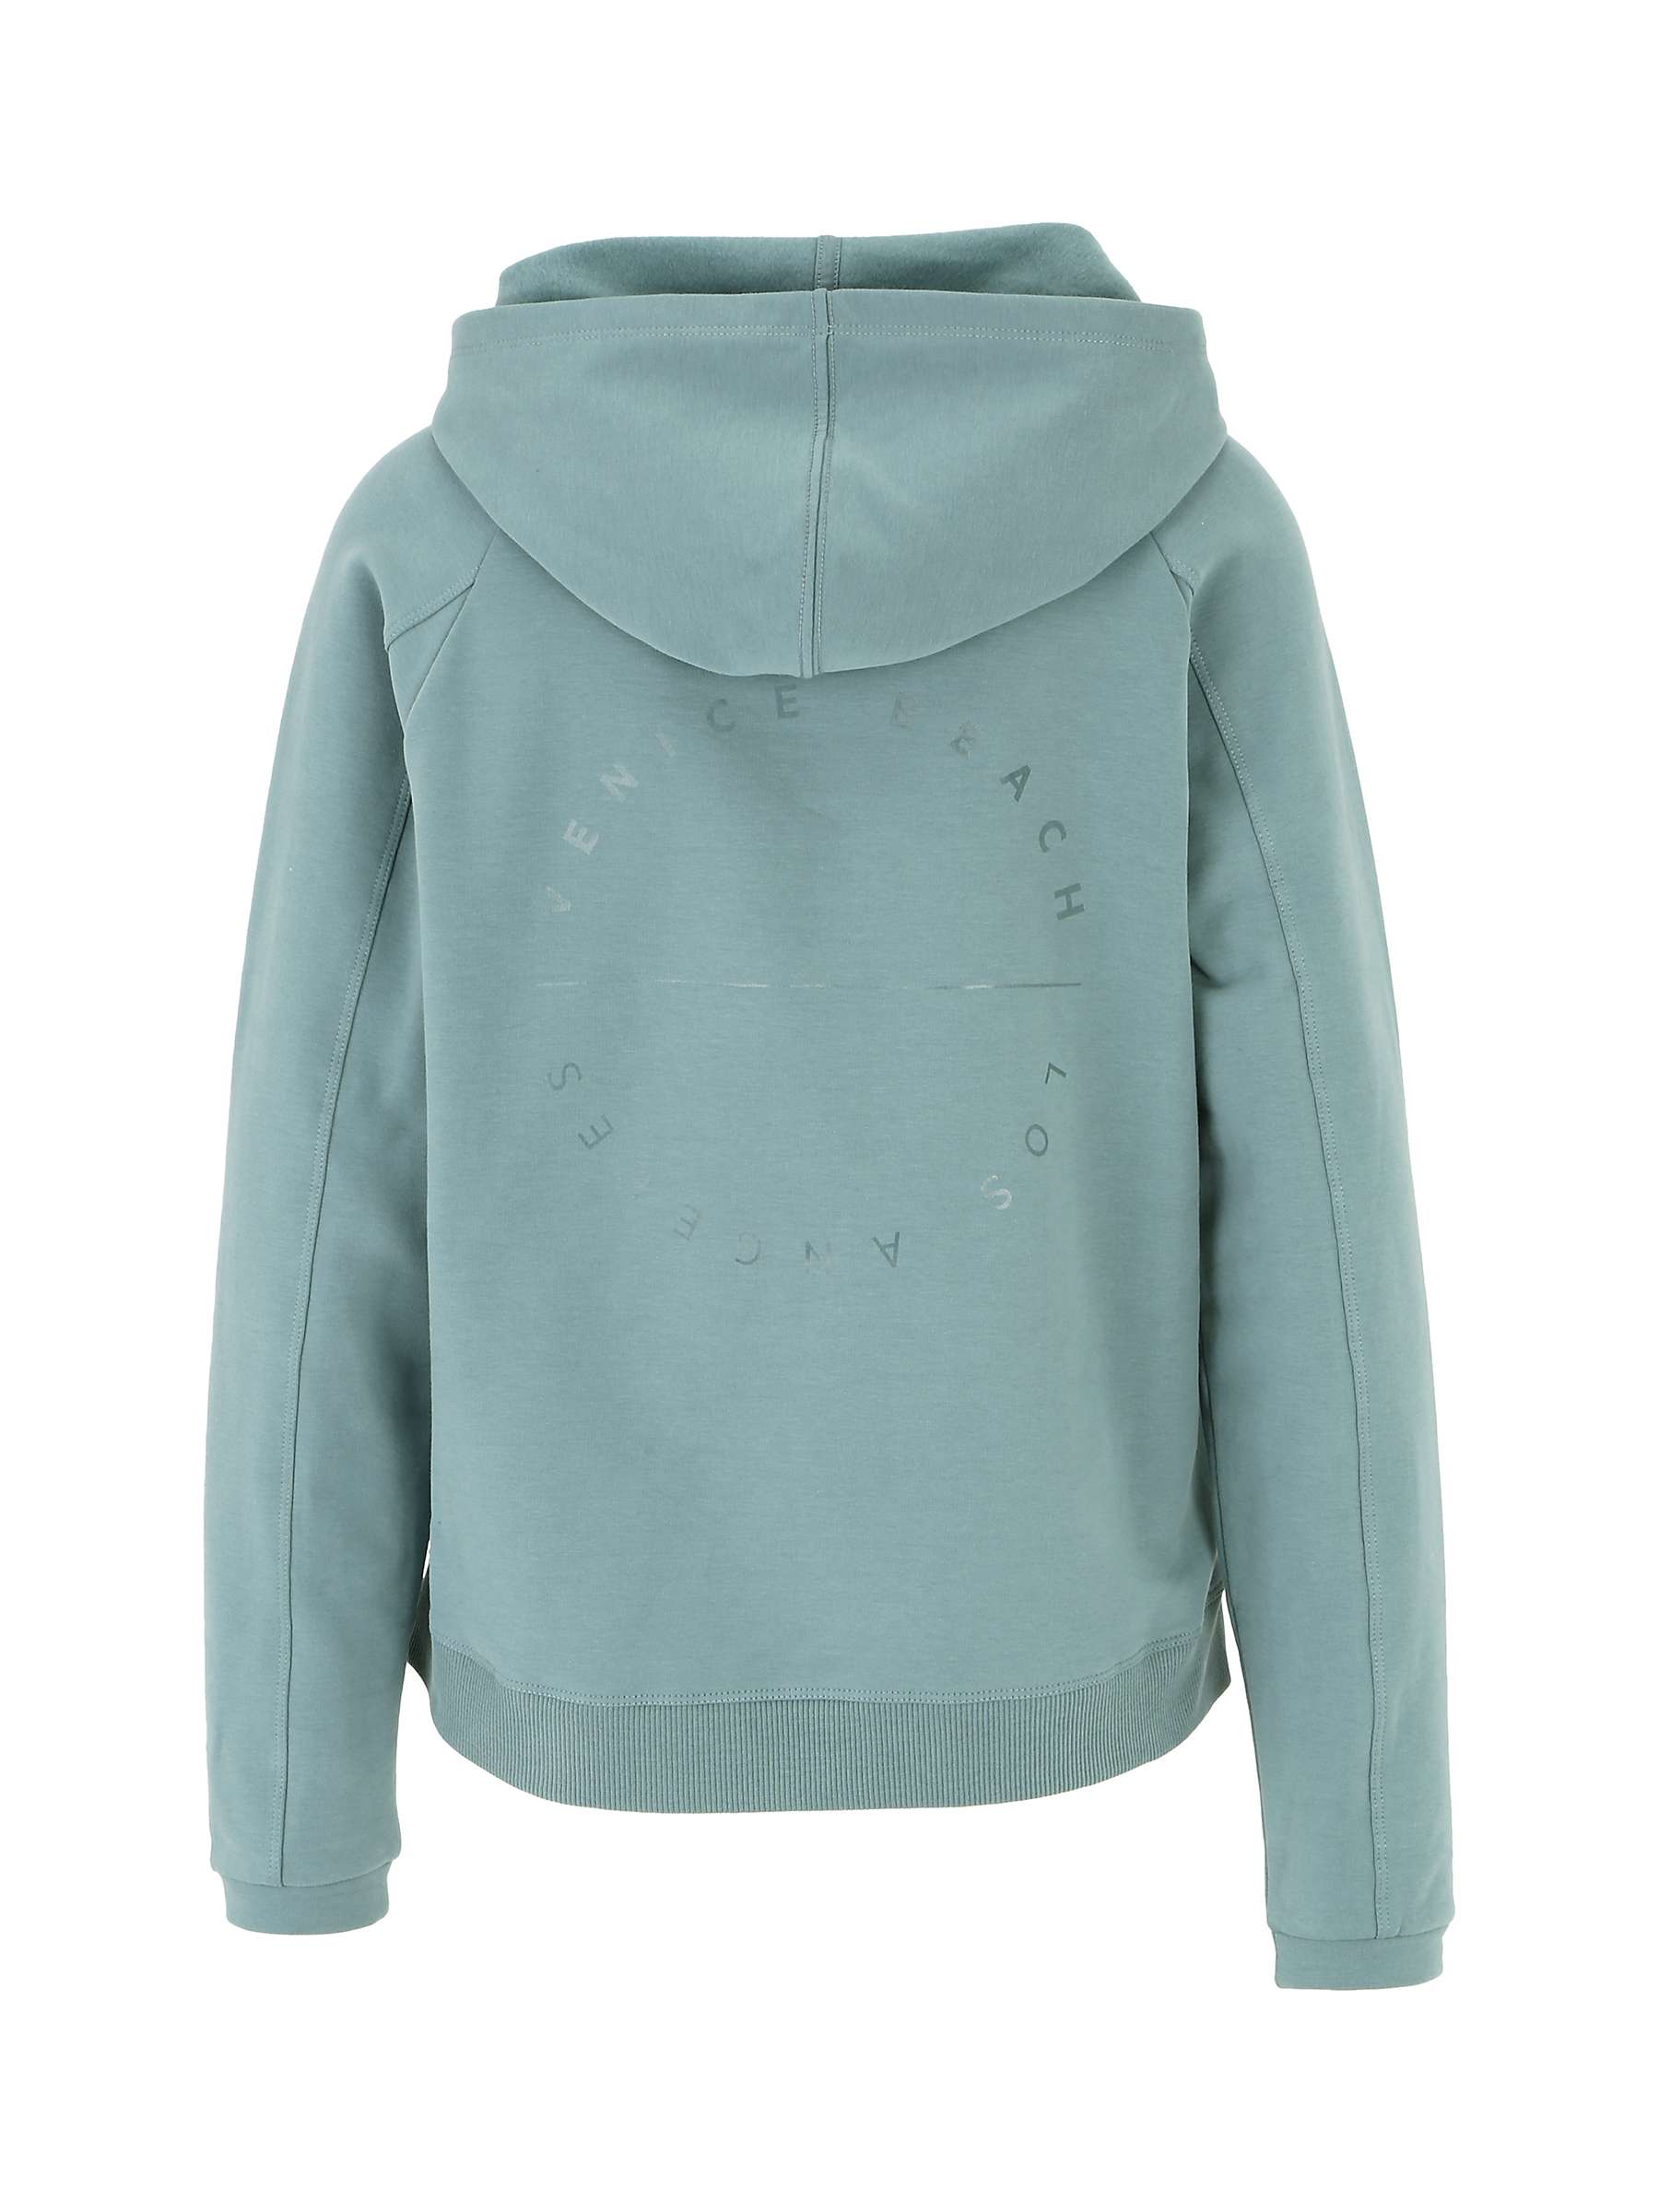 Buy Venice Beach Liyana Cotton Blend Hoodie, Agave Online at johnlewis.com